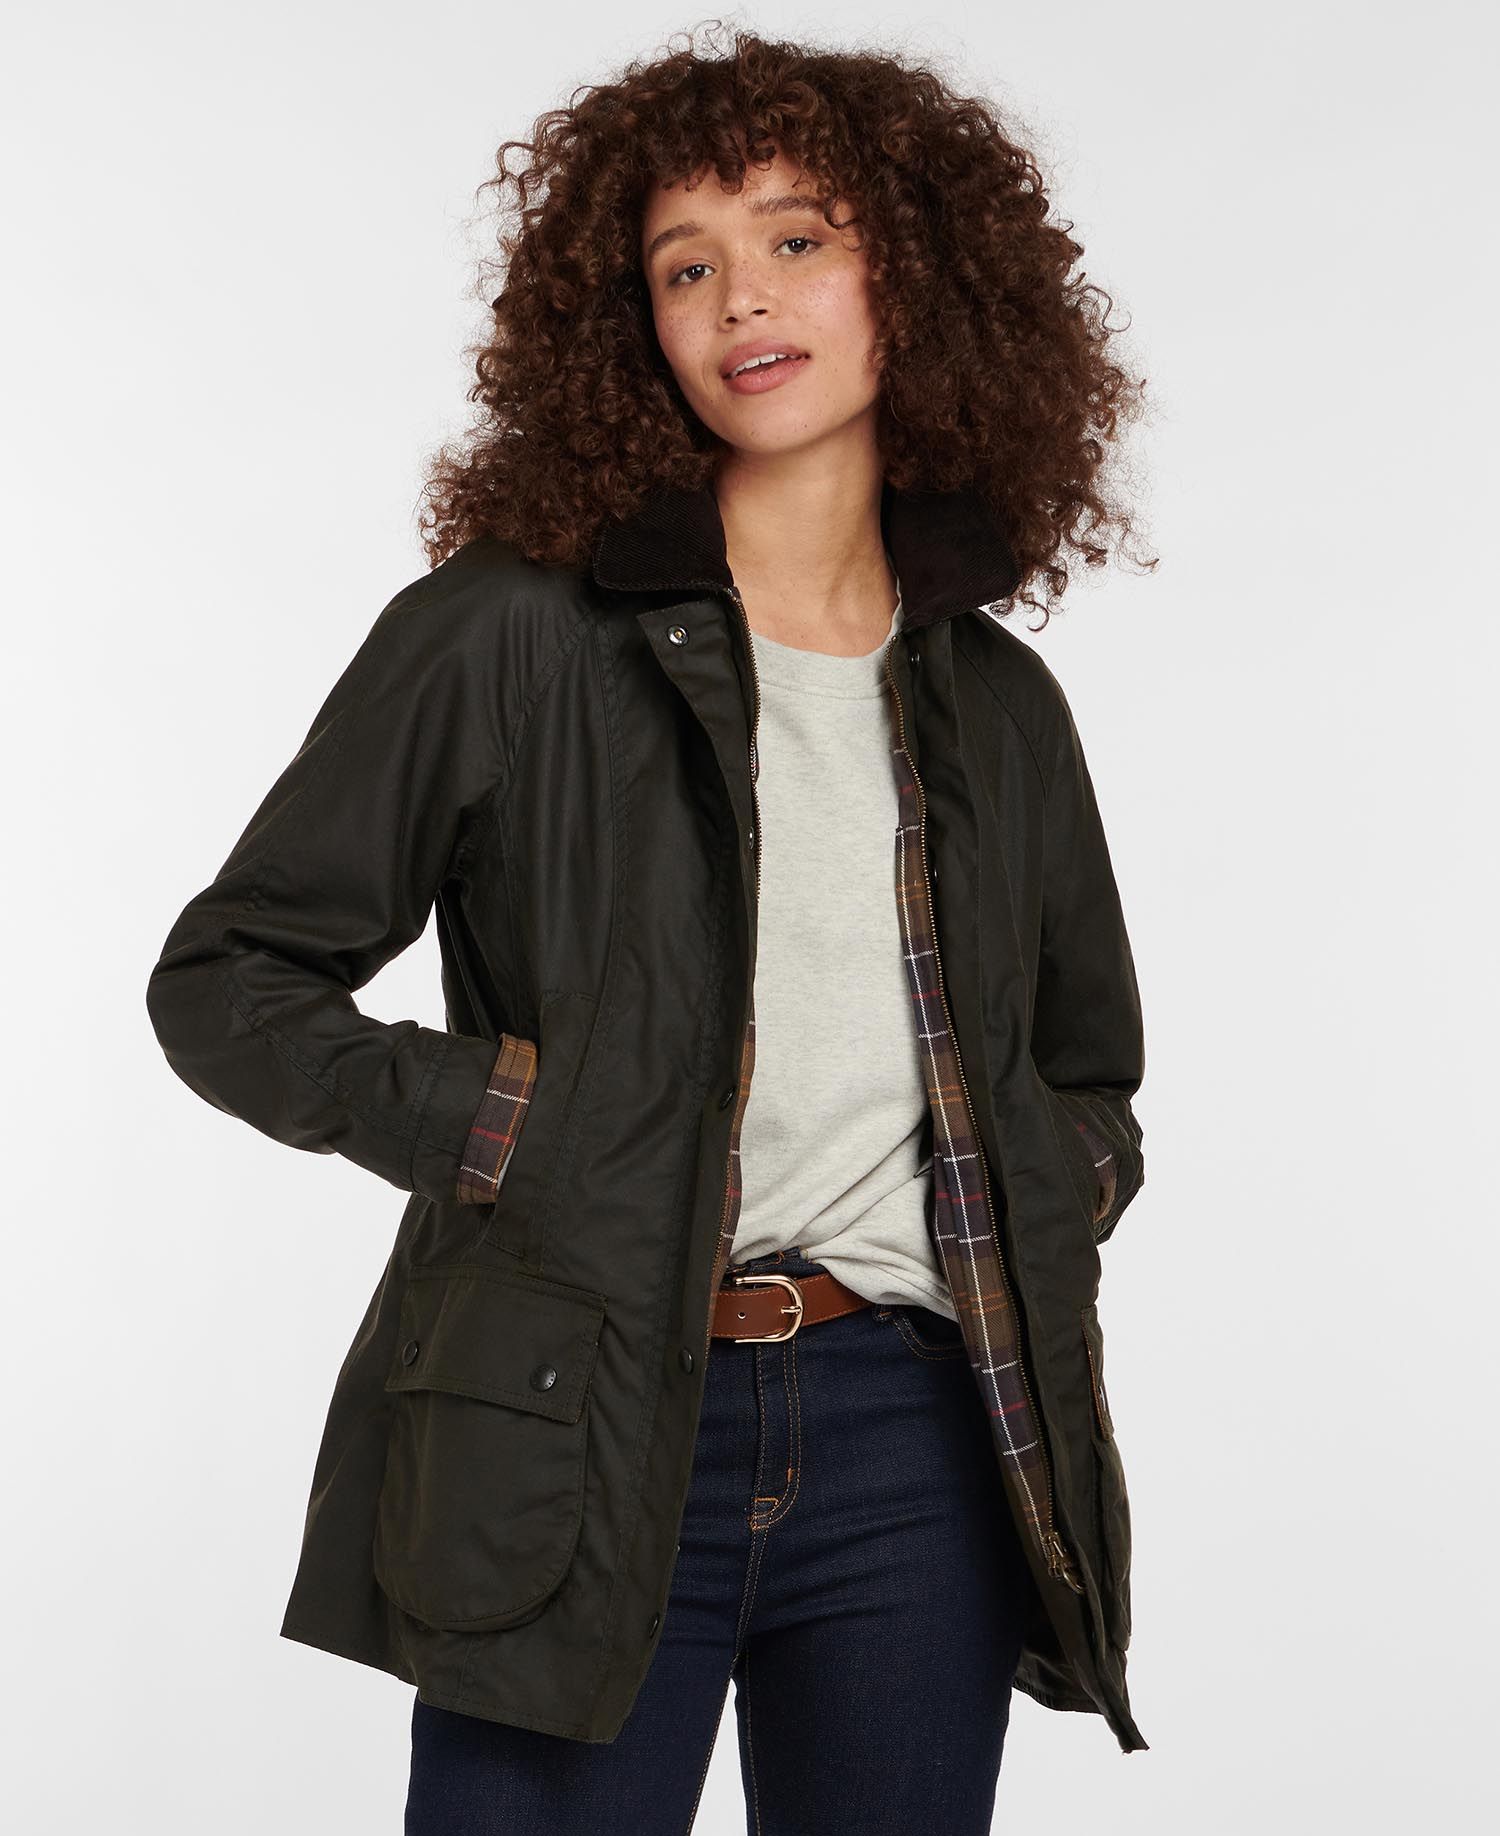 Barbour Beadnell Wax Jacket In Brown Barbour | vlr.eng.br